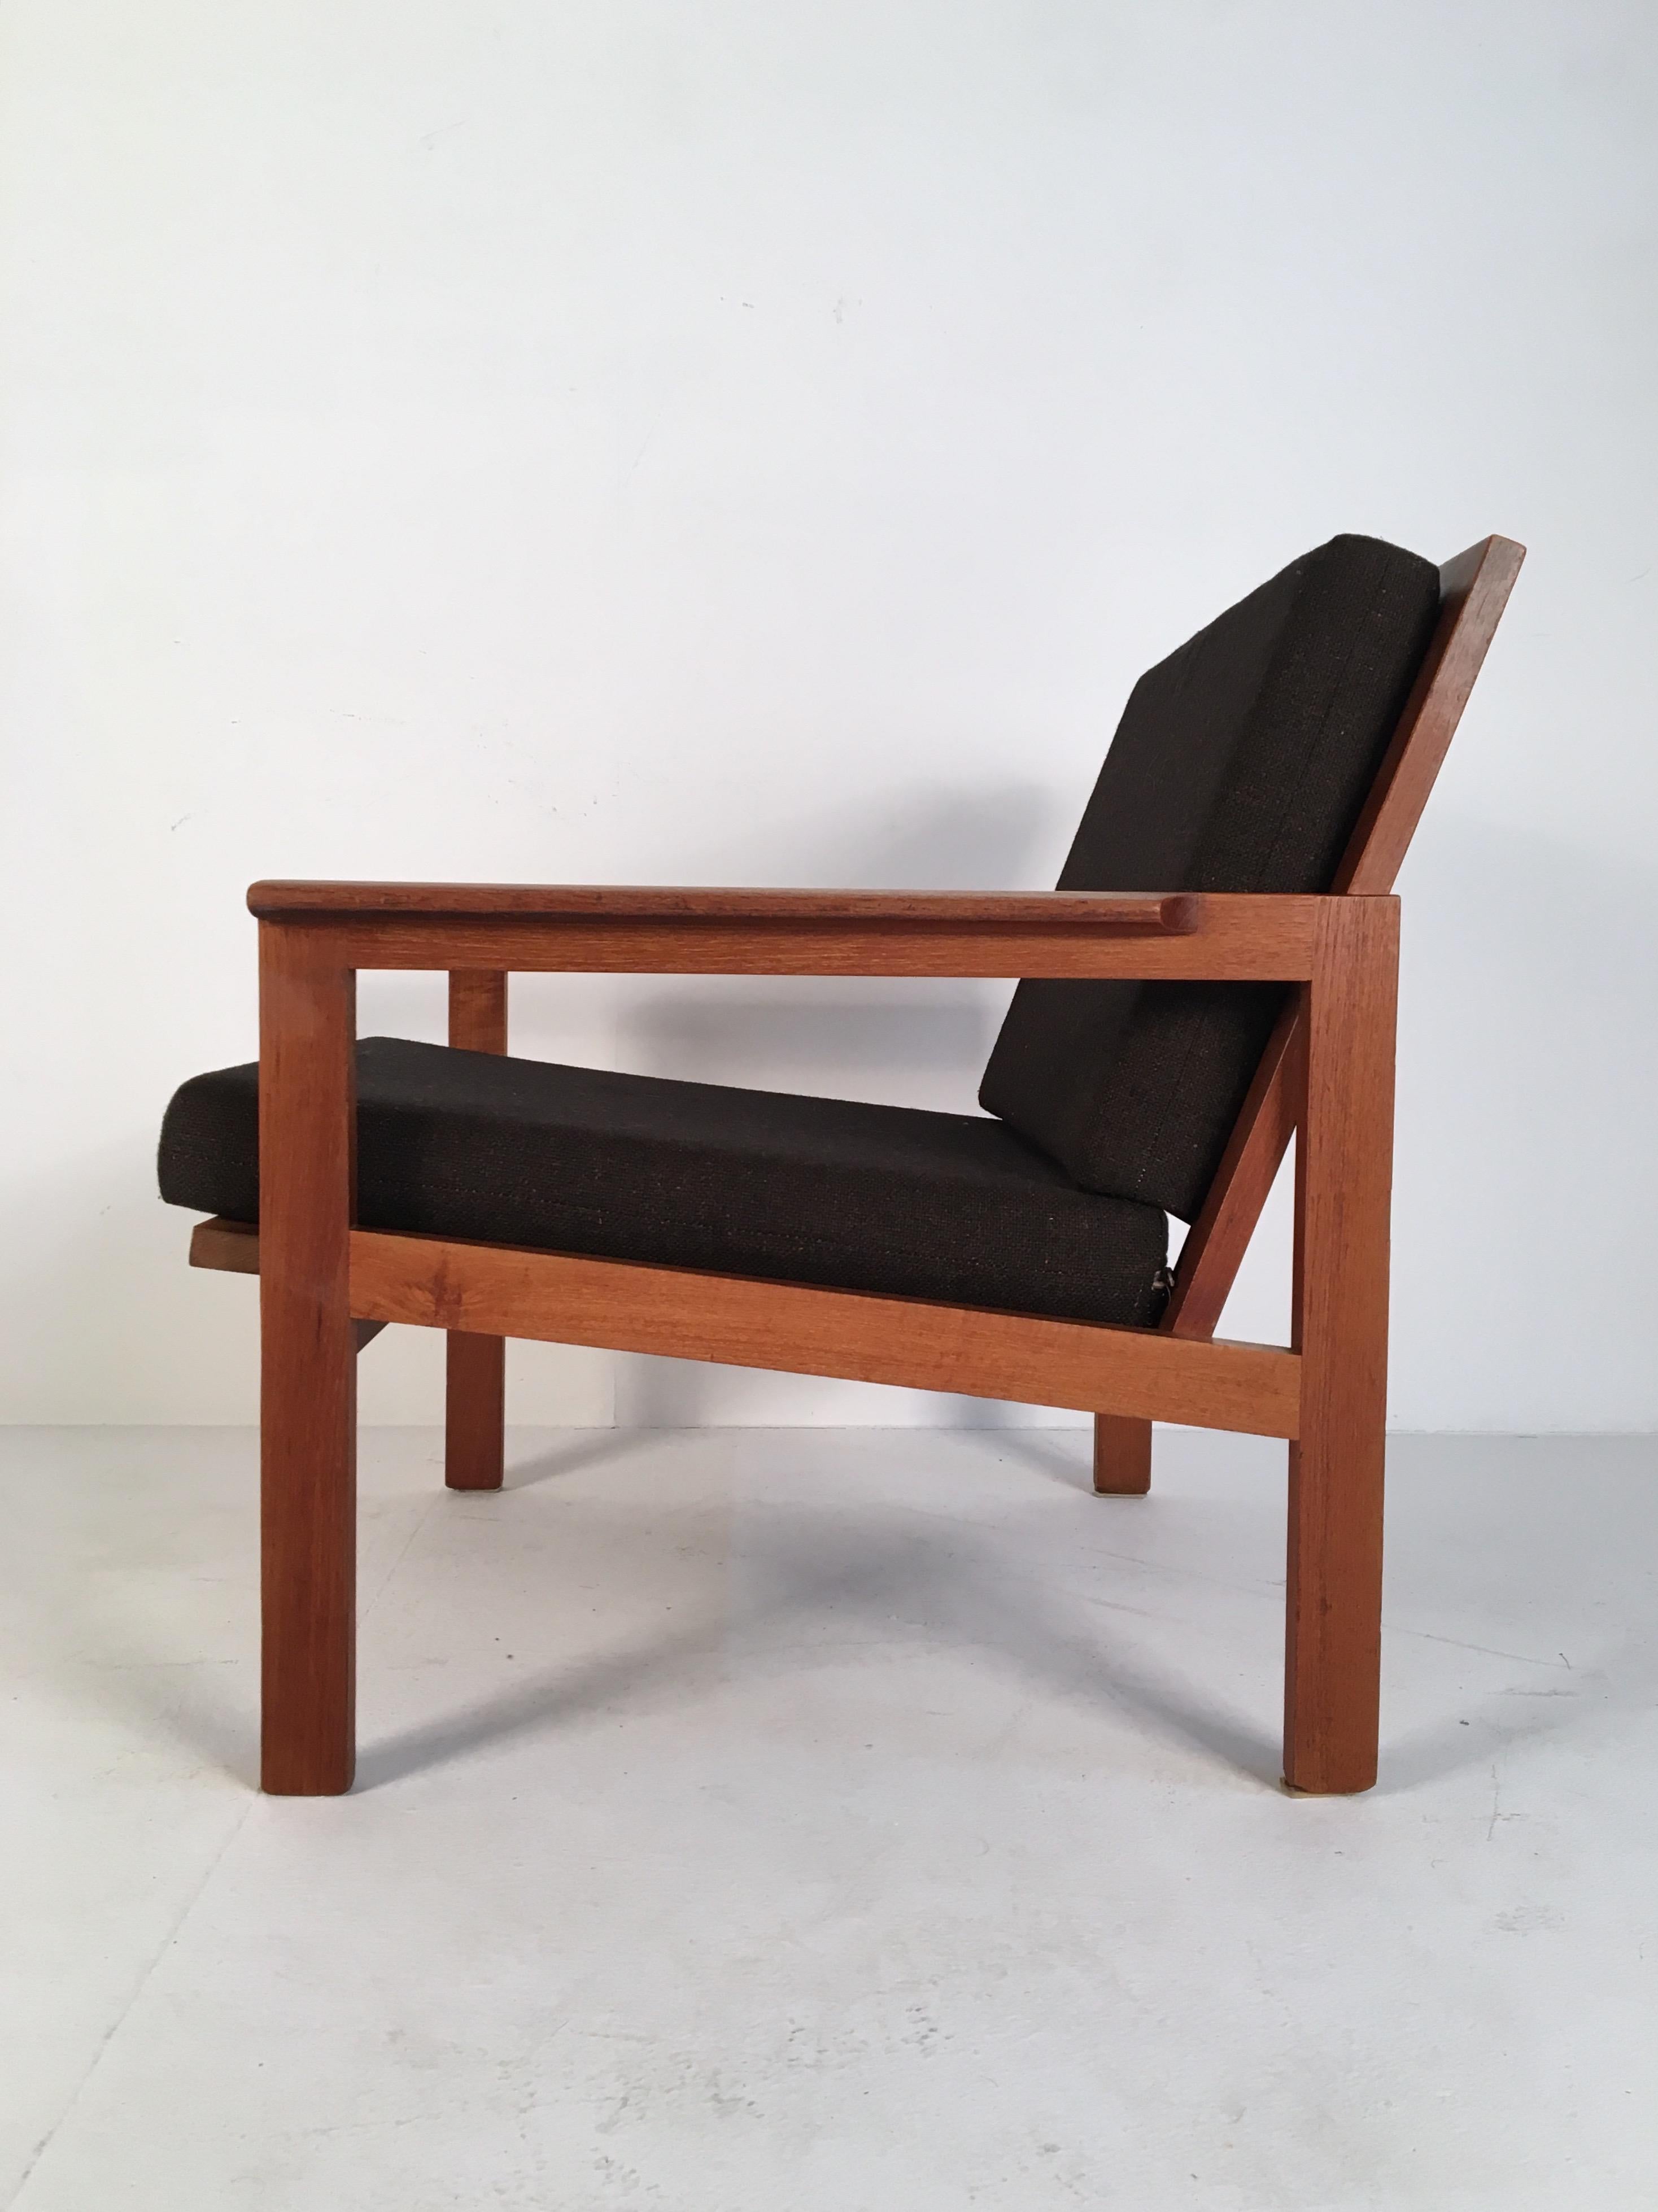 Midcentury Brown Tweed & Teak Lounge Chair by Illum Wikkelsø Denmark, circa 1960 In Good Condition For Sale In London, GB